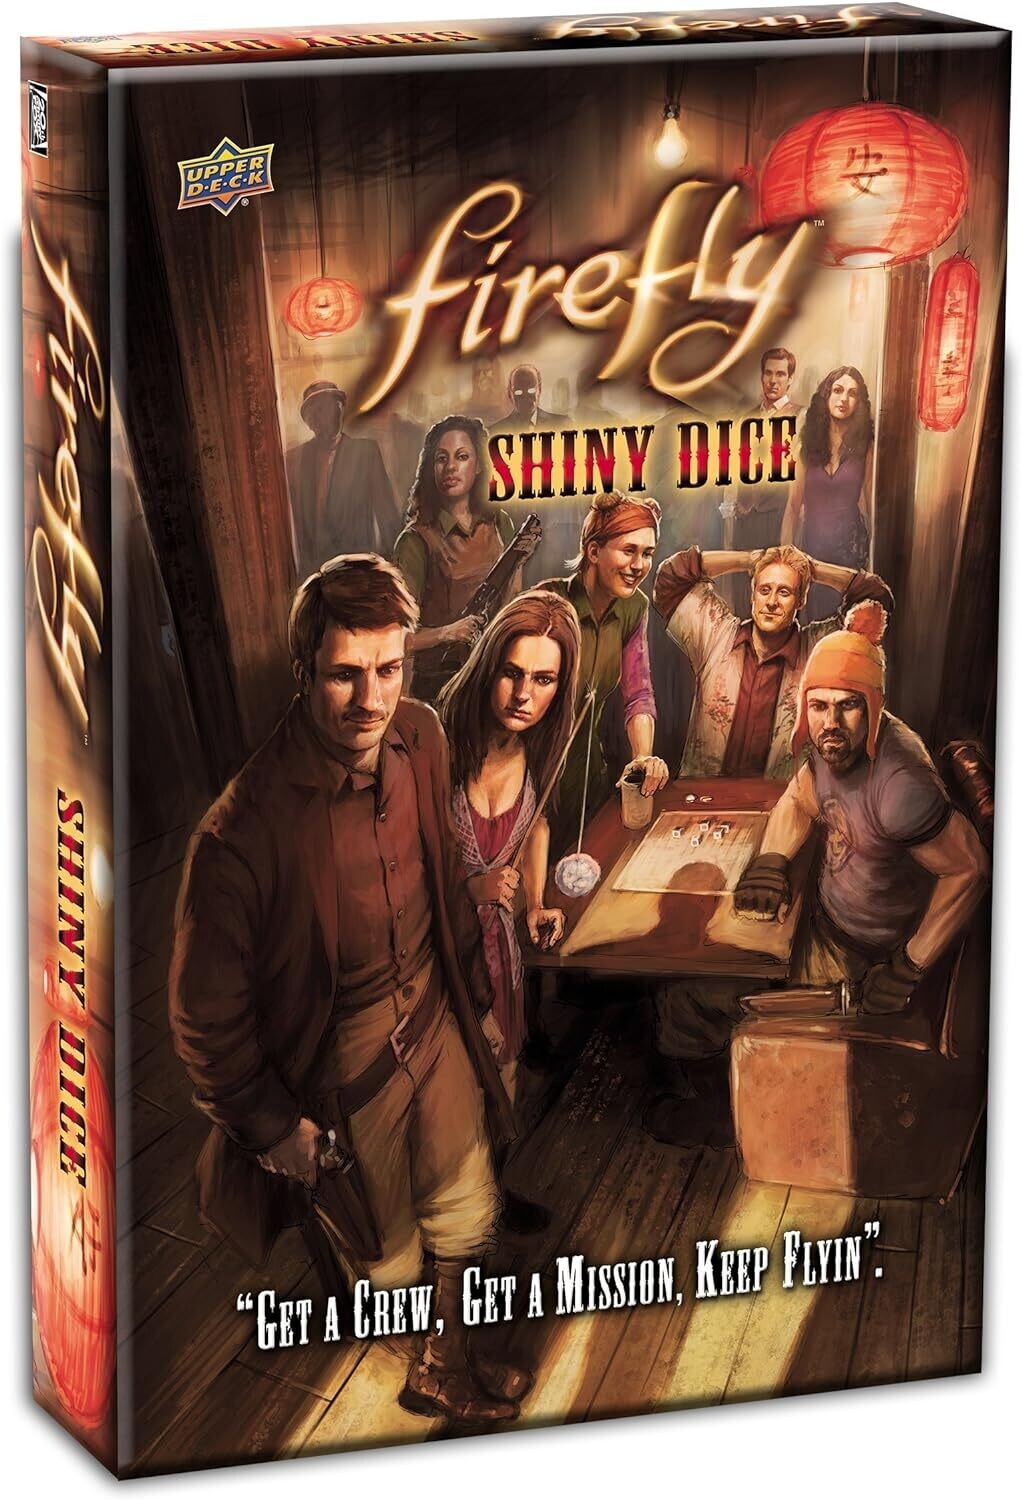 Entertainment Earth Firefly Shiny Dice Game (New in Plastic)